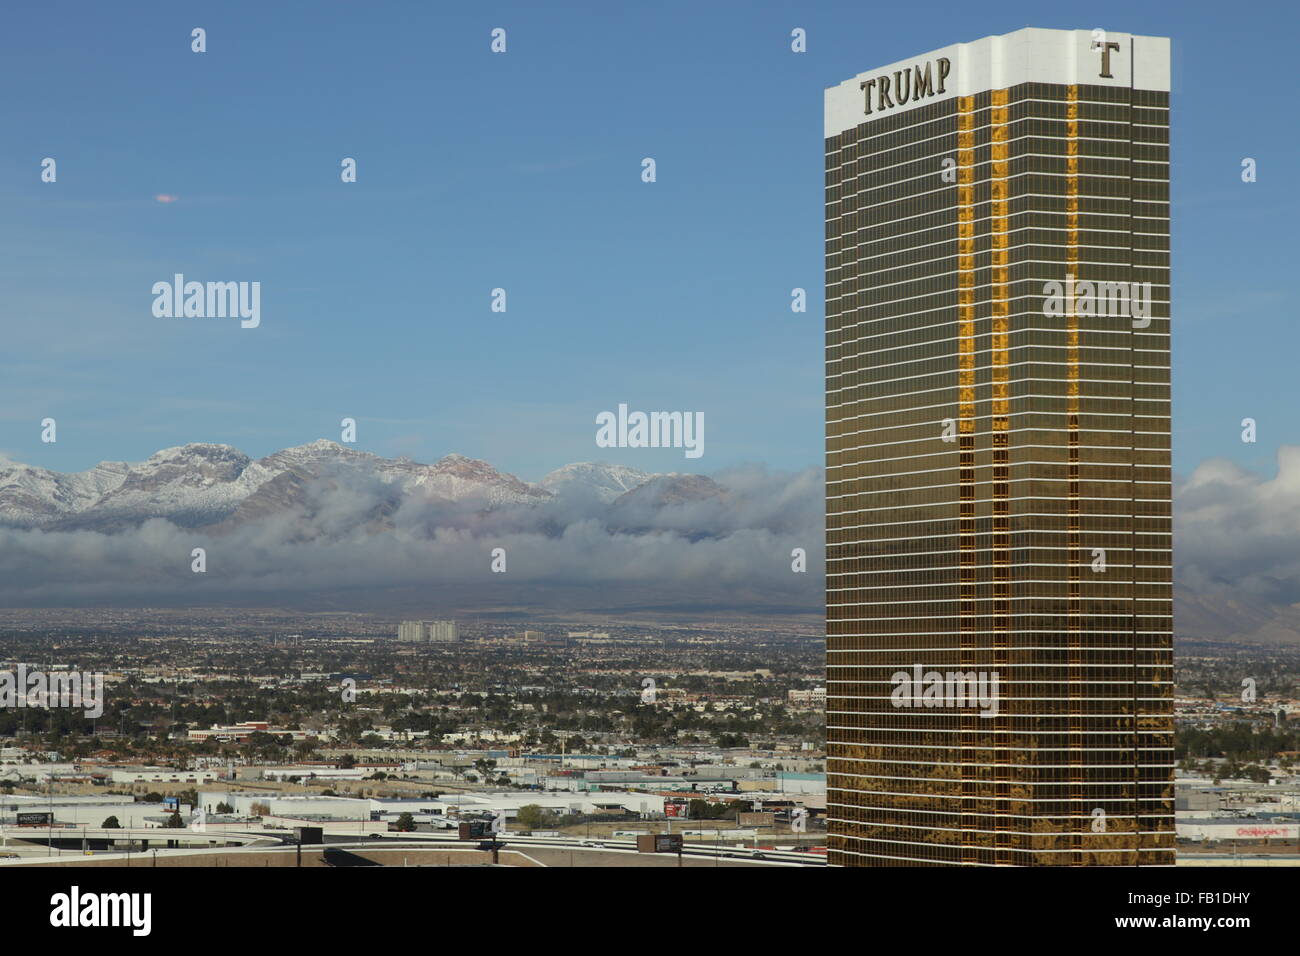 A view of the 64-stories tall  Trump Hotel Las Vegas, which is the talles occupied building in Las Vegas, USA, 6 January 2016. The luxury hotel is owned by the Trump Organization LLC of real-estate mogul Donald Trump. The hotel was opened on 31 March 2008 and in September 2012 Trump Organization sold 300 appartmens to the Hilton hotel group. Photo:  Christoph Dernbach/dpa - NO WIRE SERVICE - Stock Photo